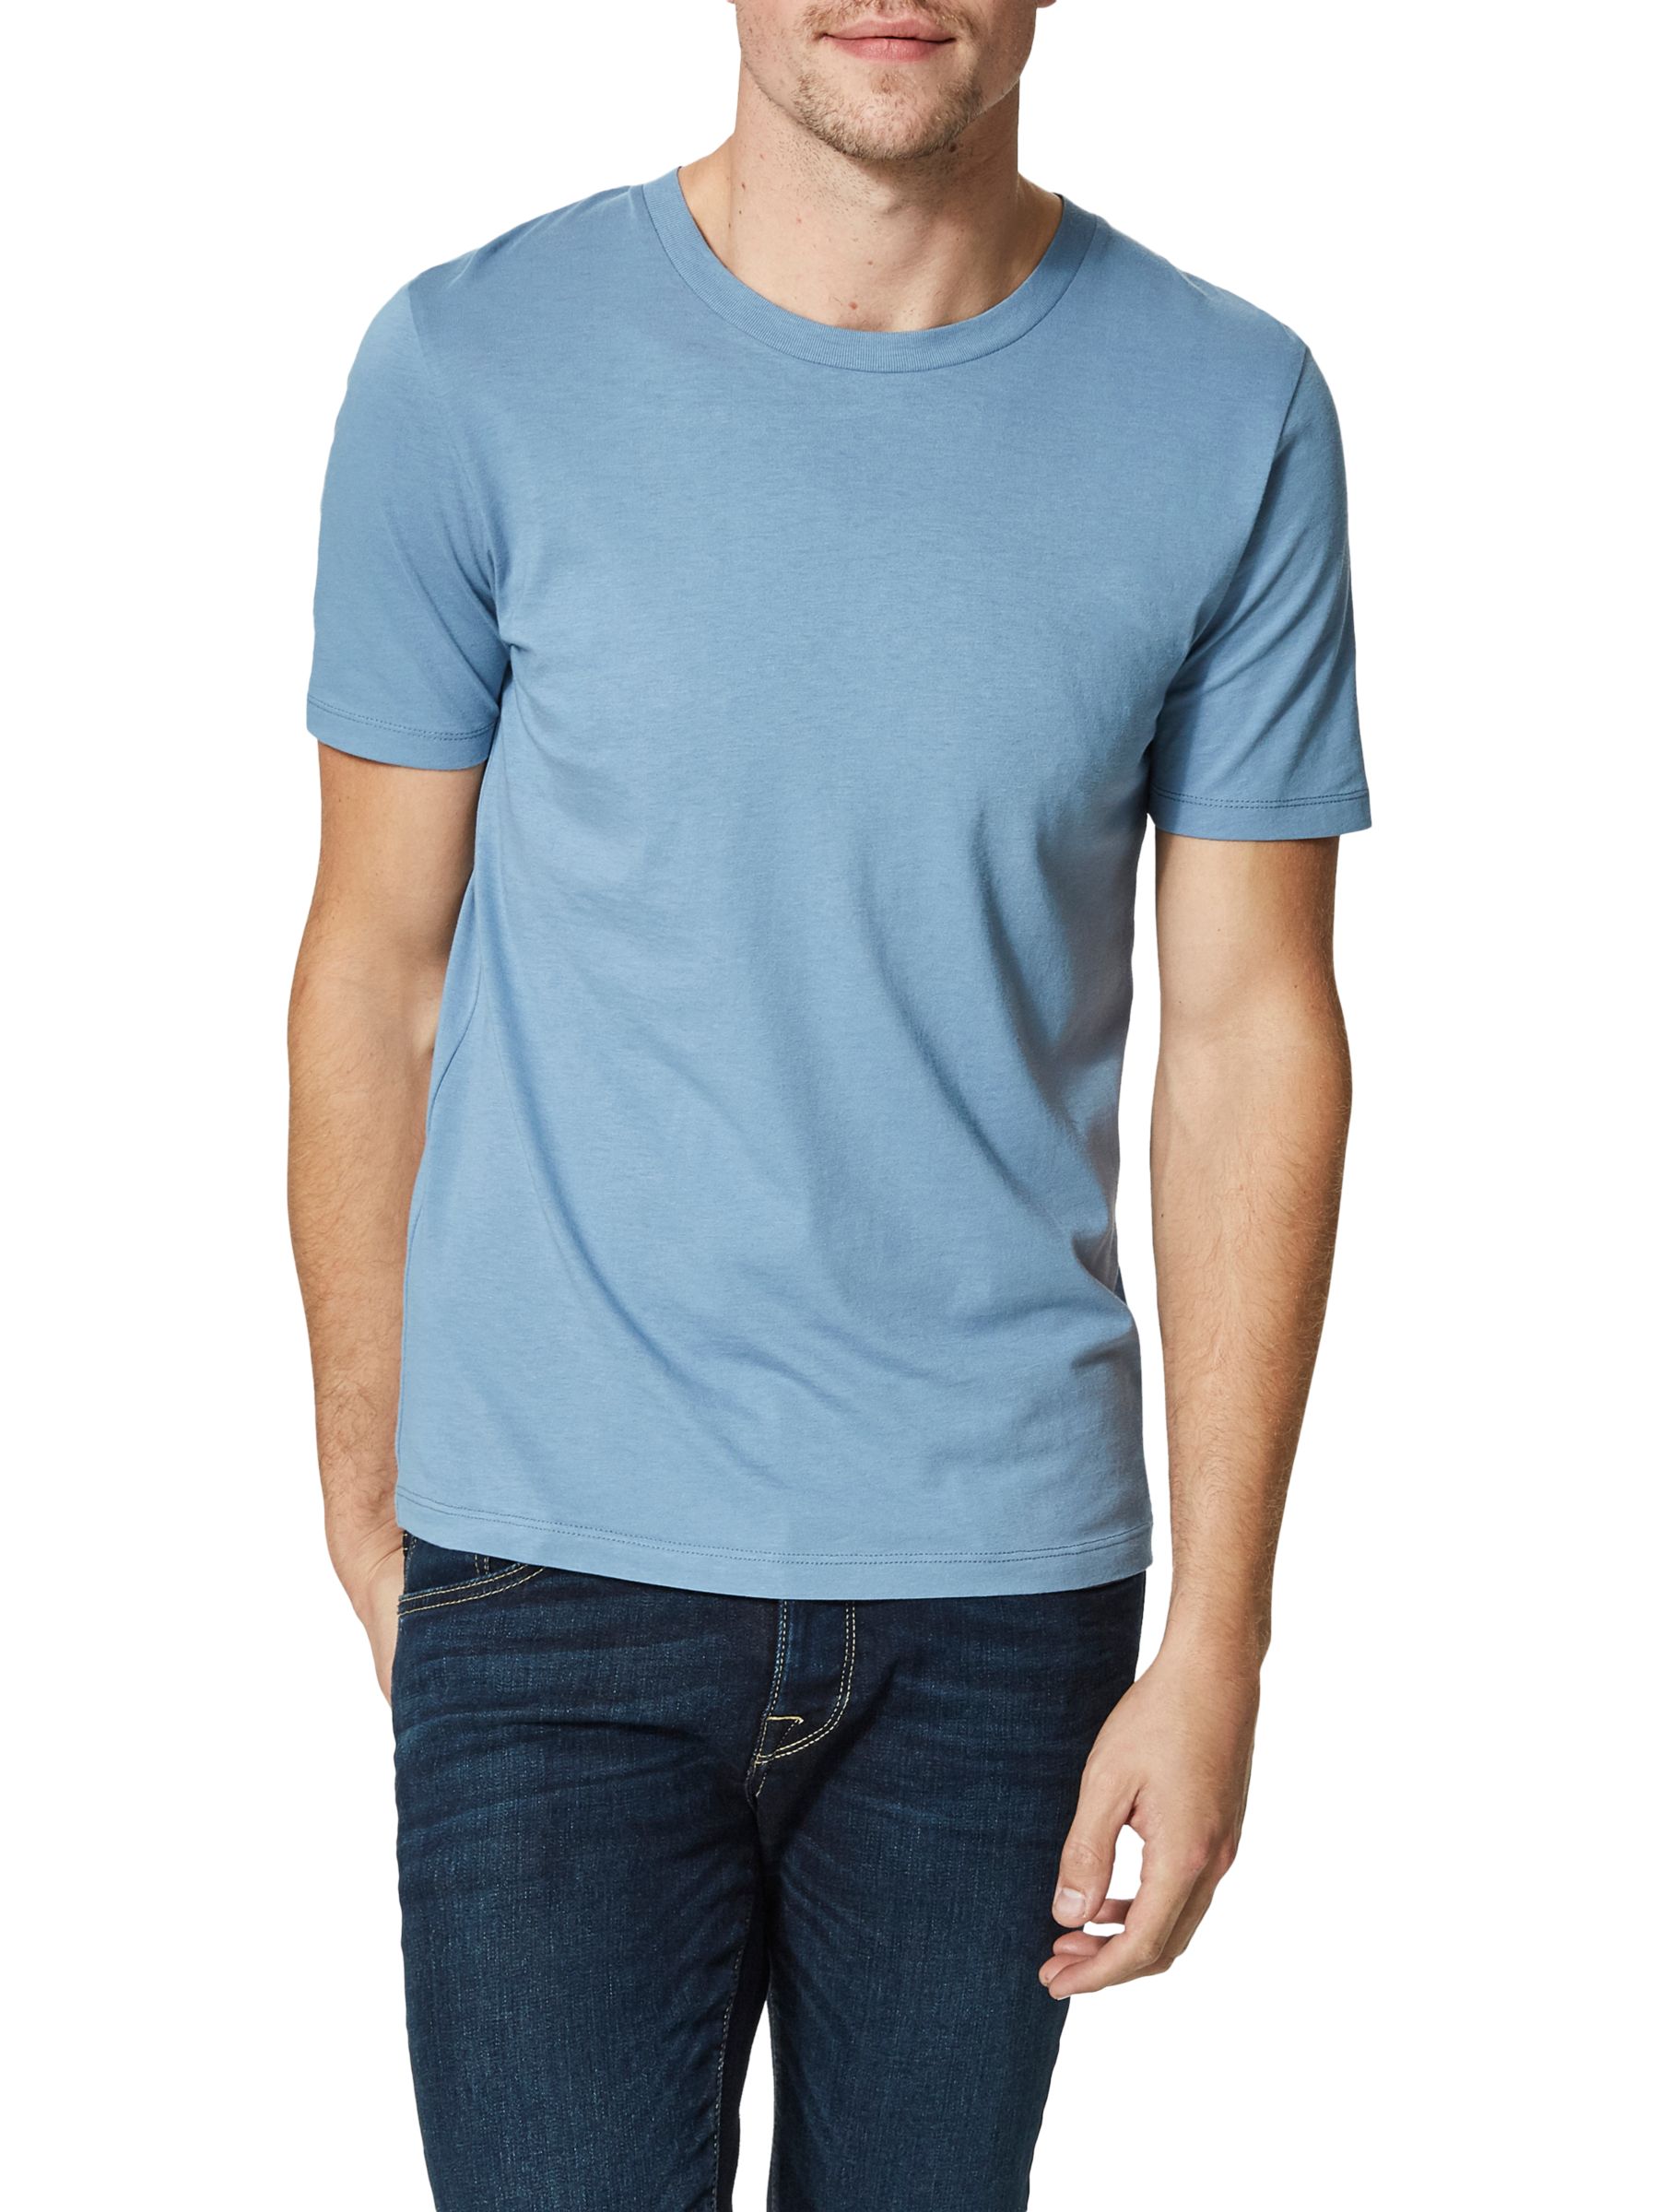 Selected Homme 'The Perfect Tee' Pima Cotton T-Shirt at John Lewis ...